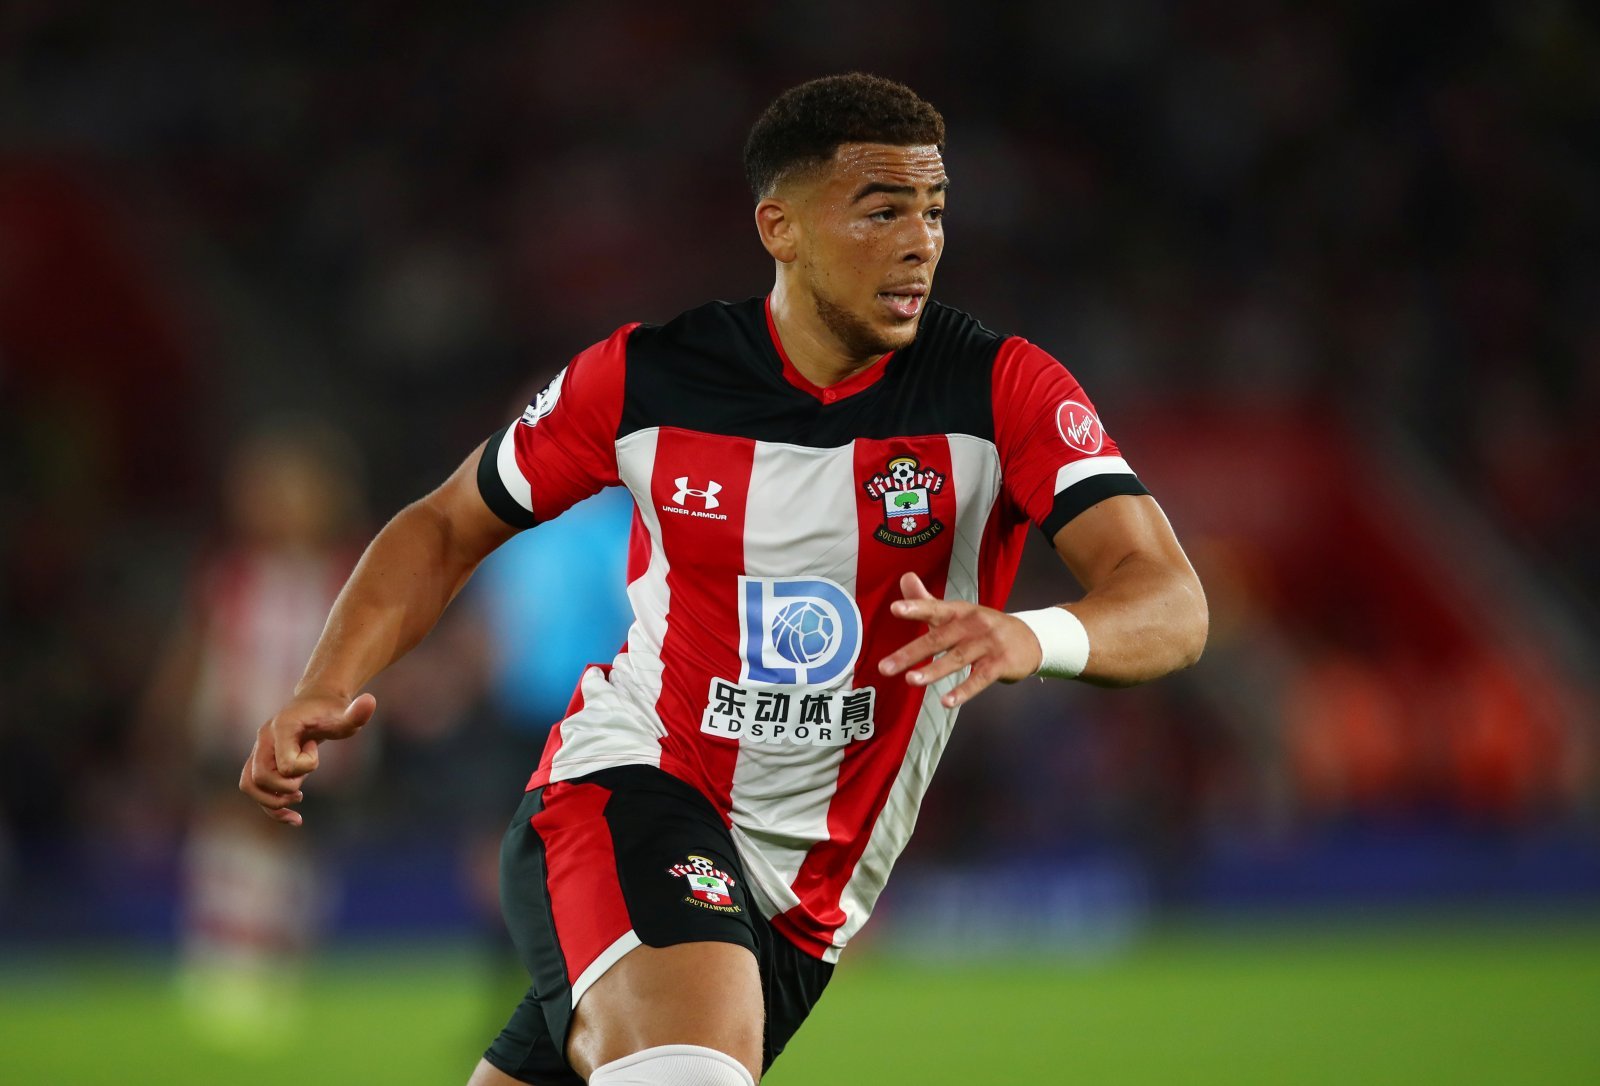 Looks gutted', 'Looks miserable' - Che Adams image has many Southampton fans cracking jokes | thisisfutbol.com